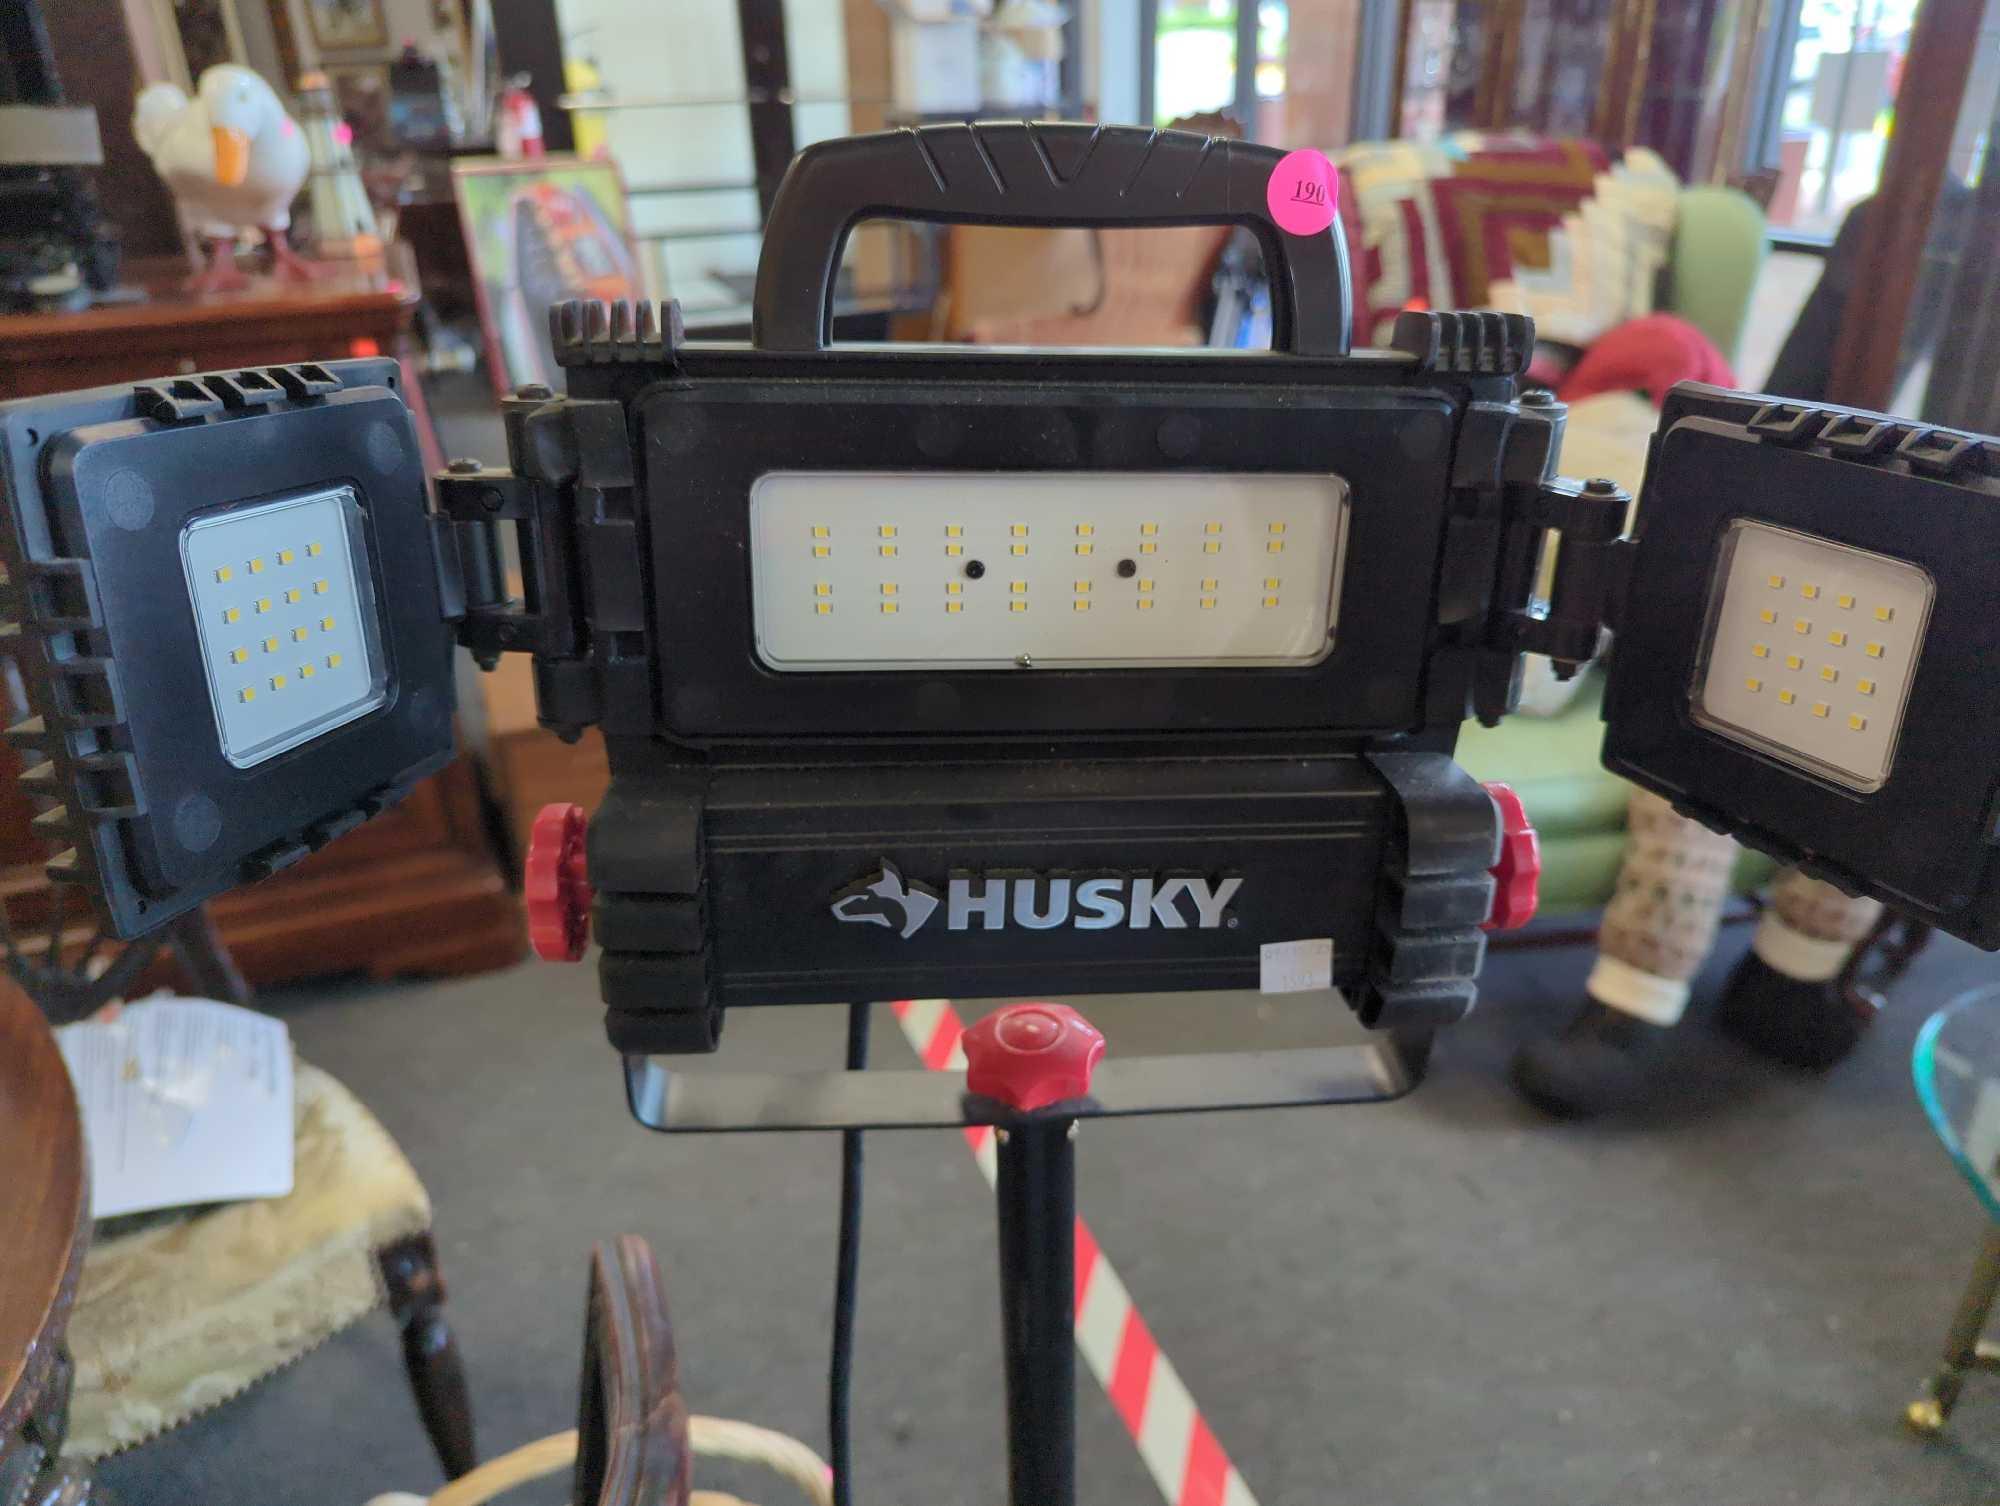 Husky 7000 lumen multi directional led tripod work light, Measure Approximately 51 inches Tall.